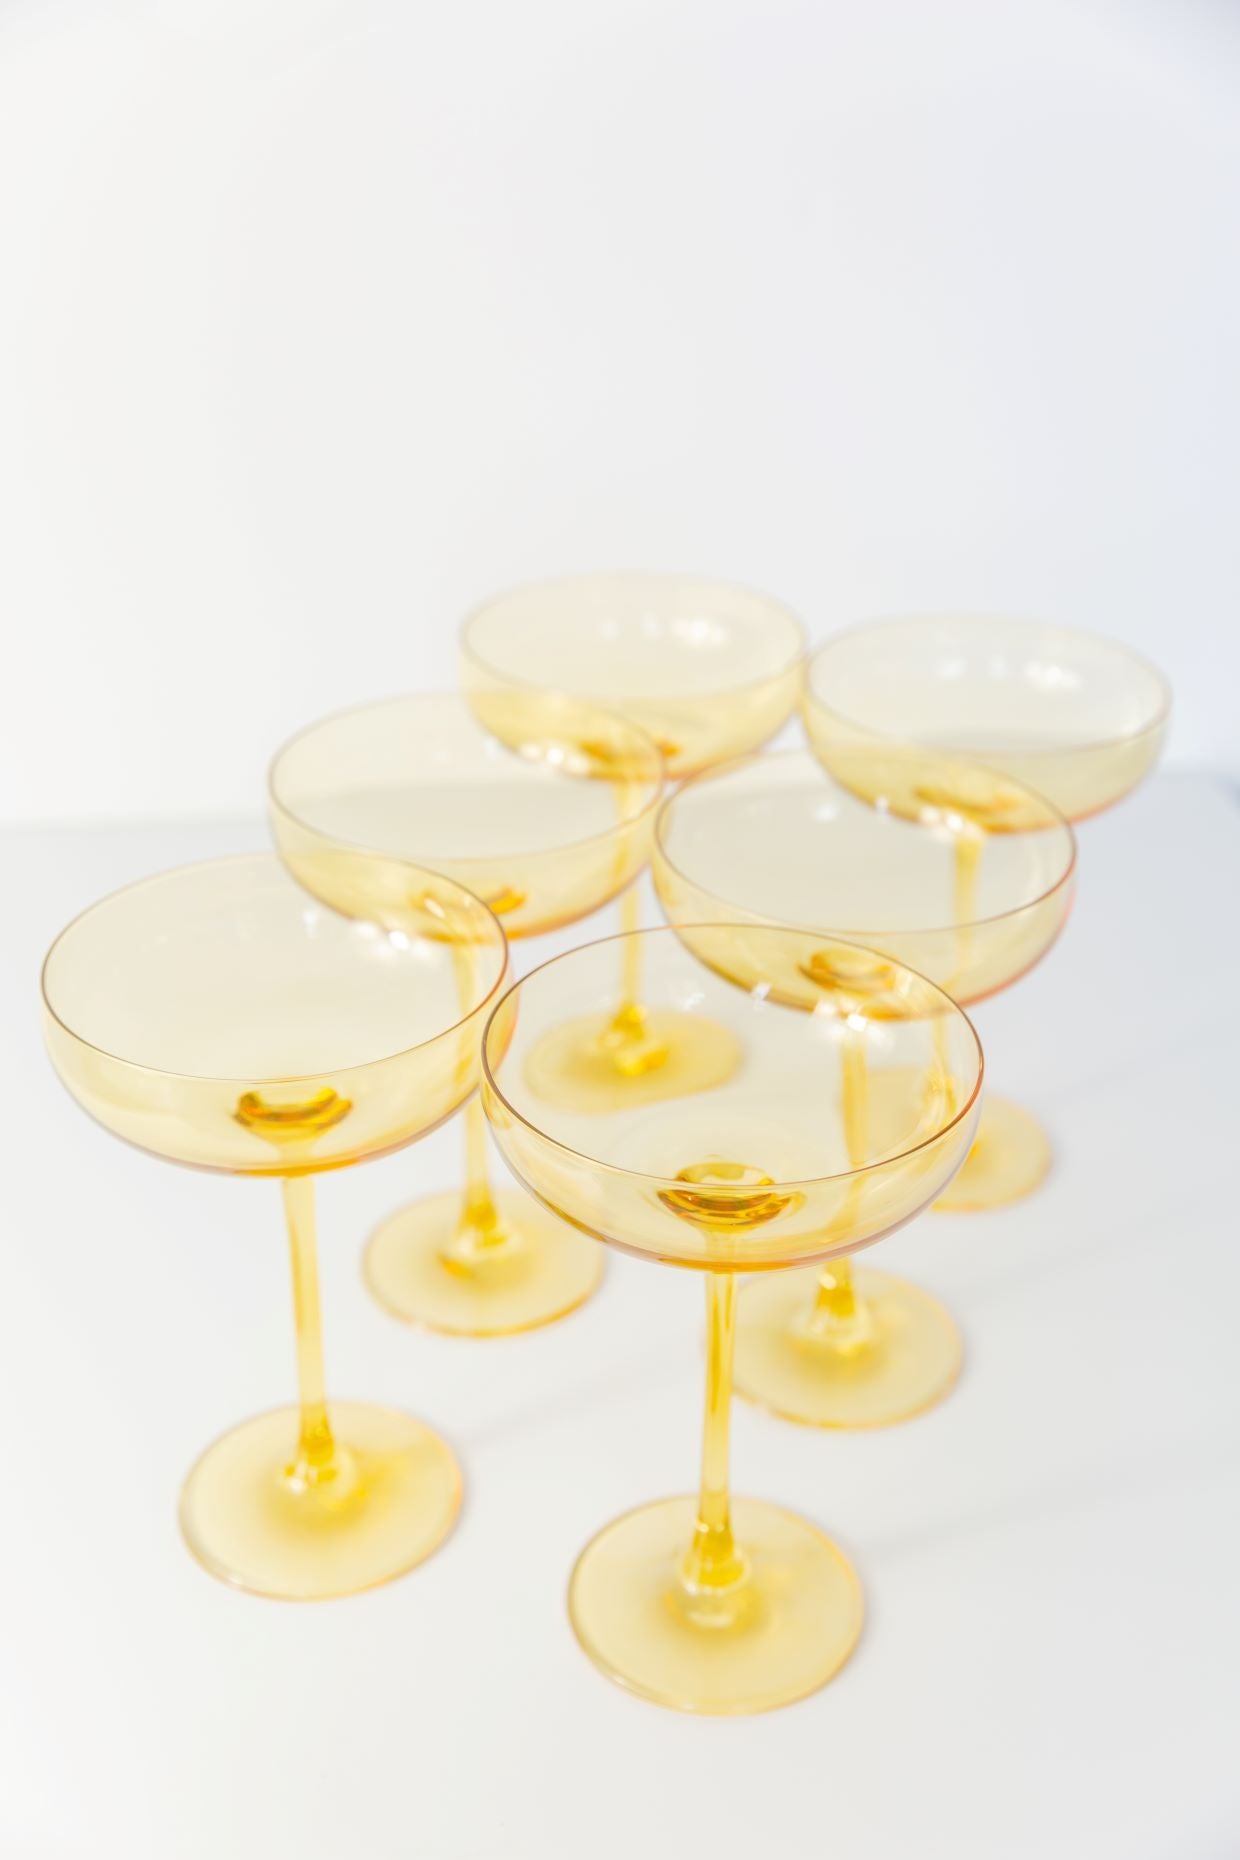 YELLOW CHAMPAGNE COUPE GLASSES, SET OF 6